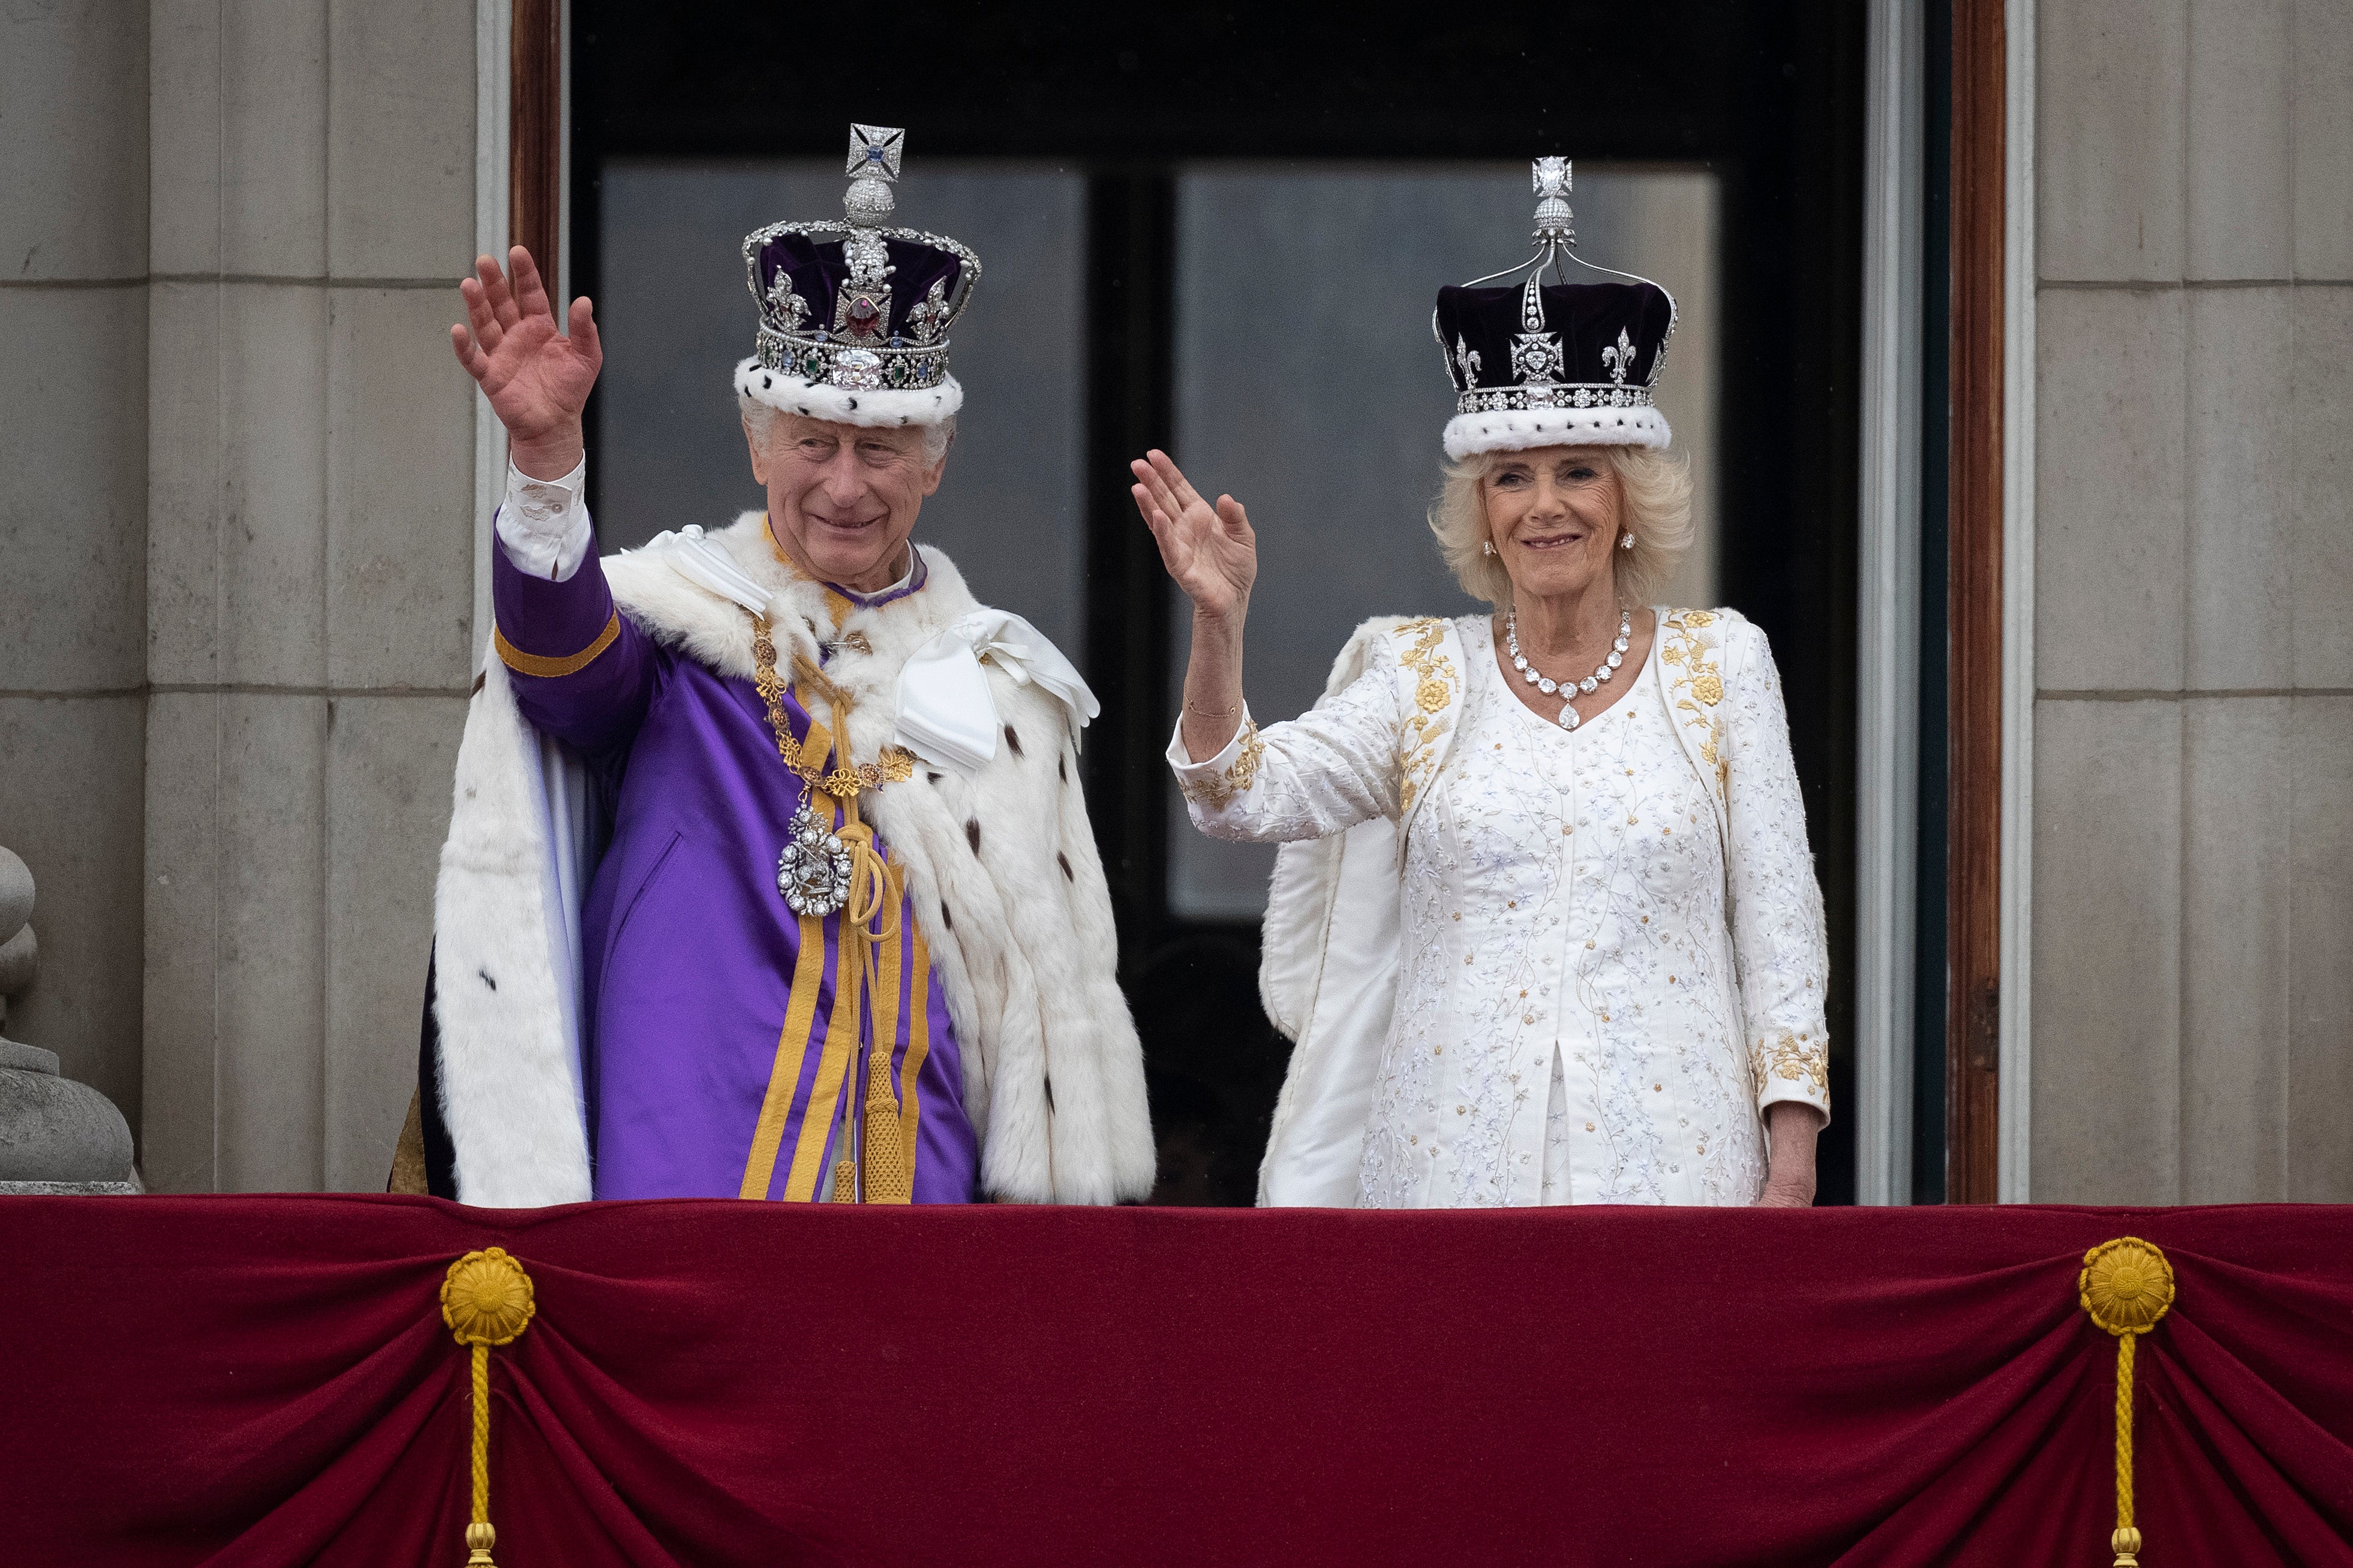 The King and Queen stand on Buckingham Palace balcony during the coronation